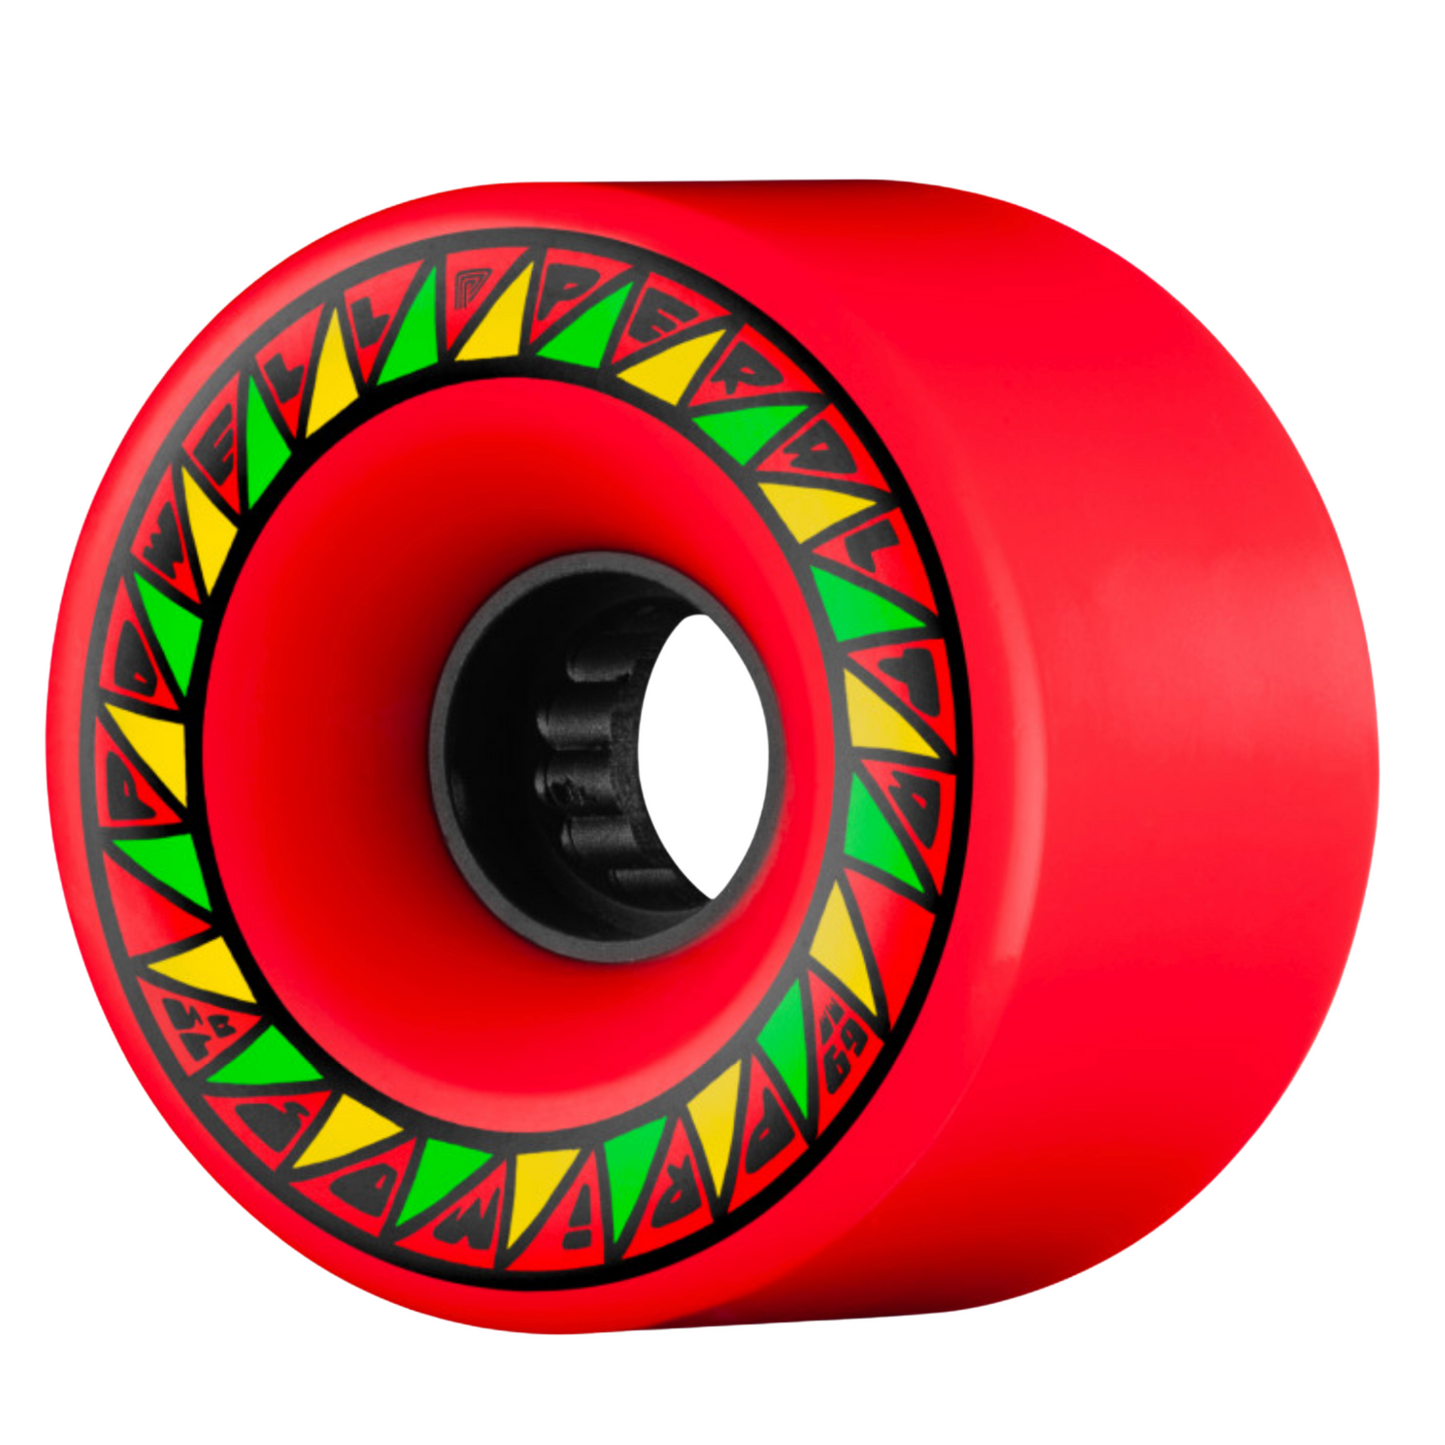 Powell Peralta Primo Wheels 69mm 75a - Red